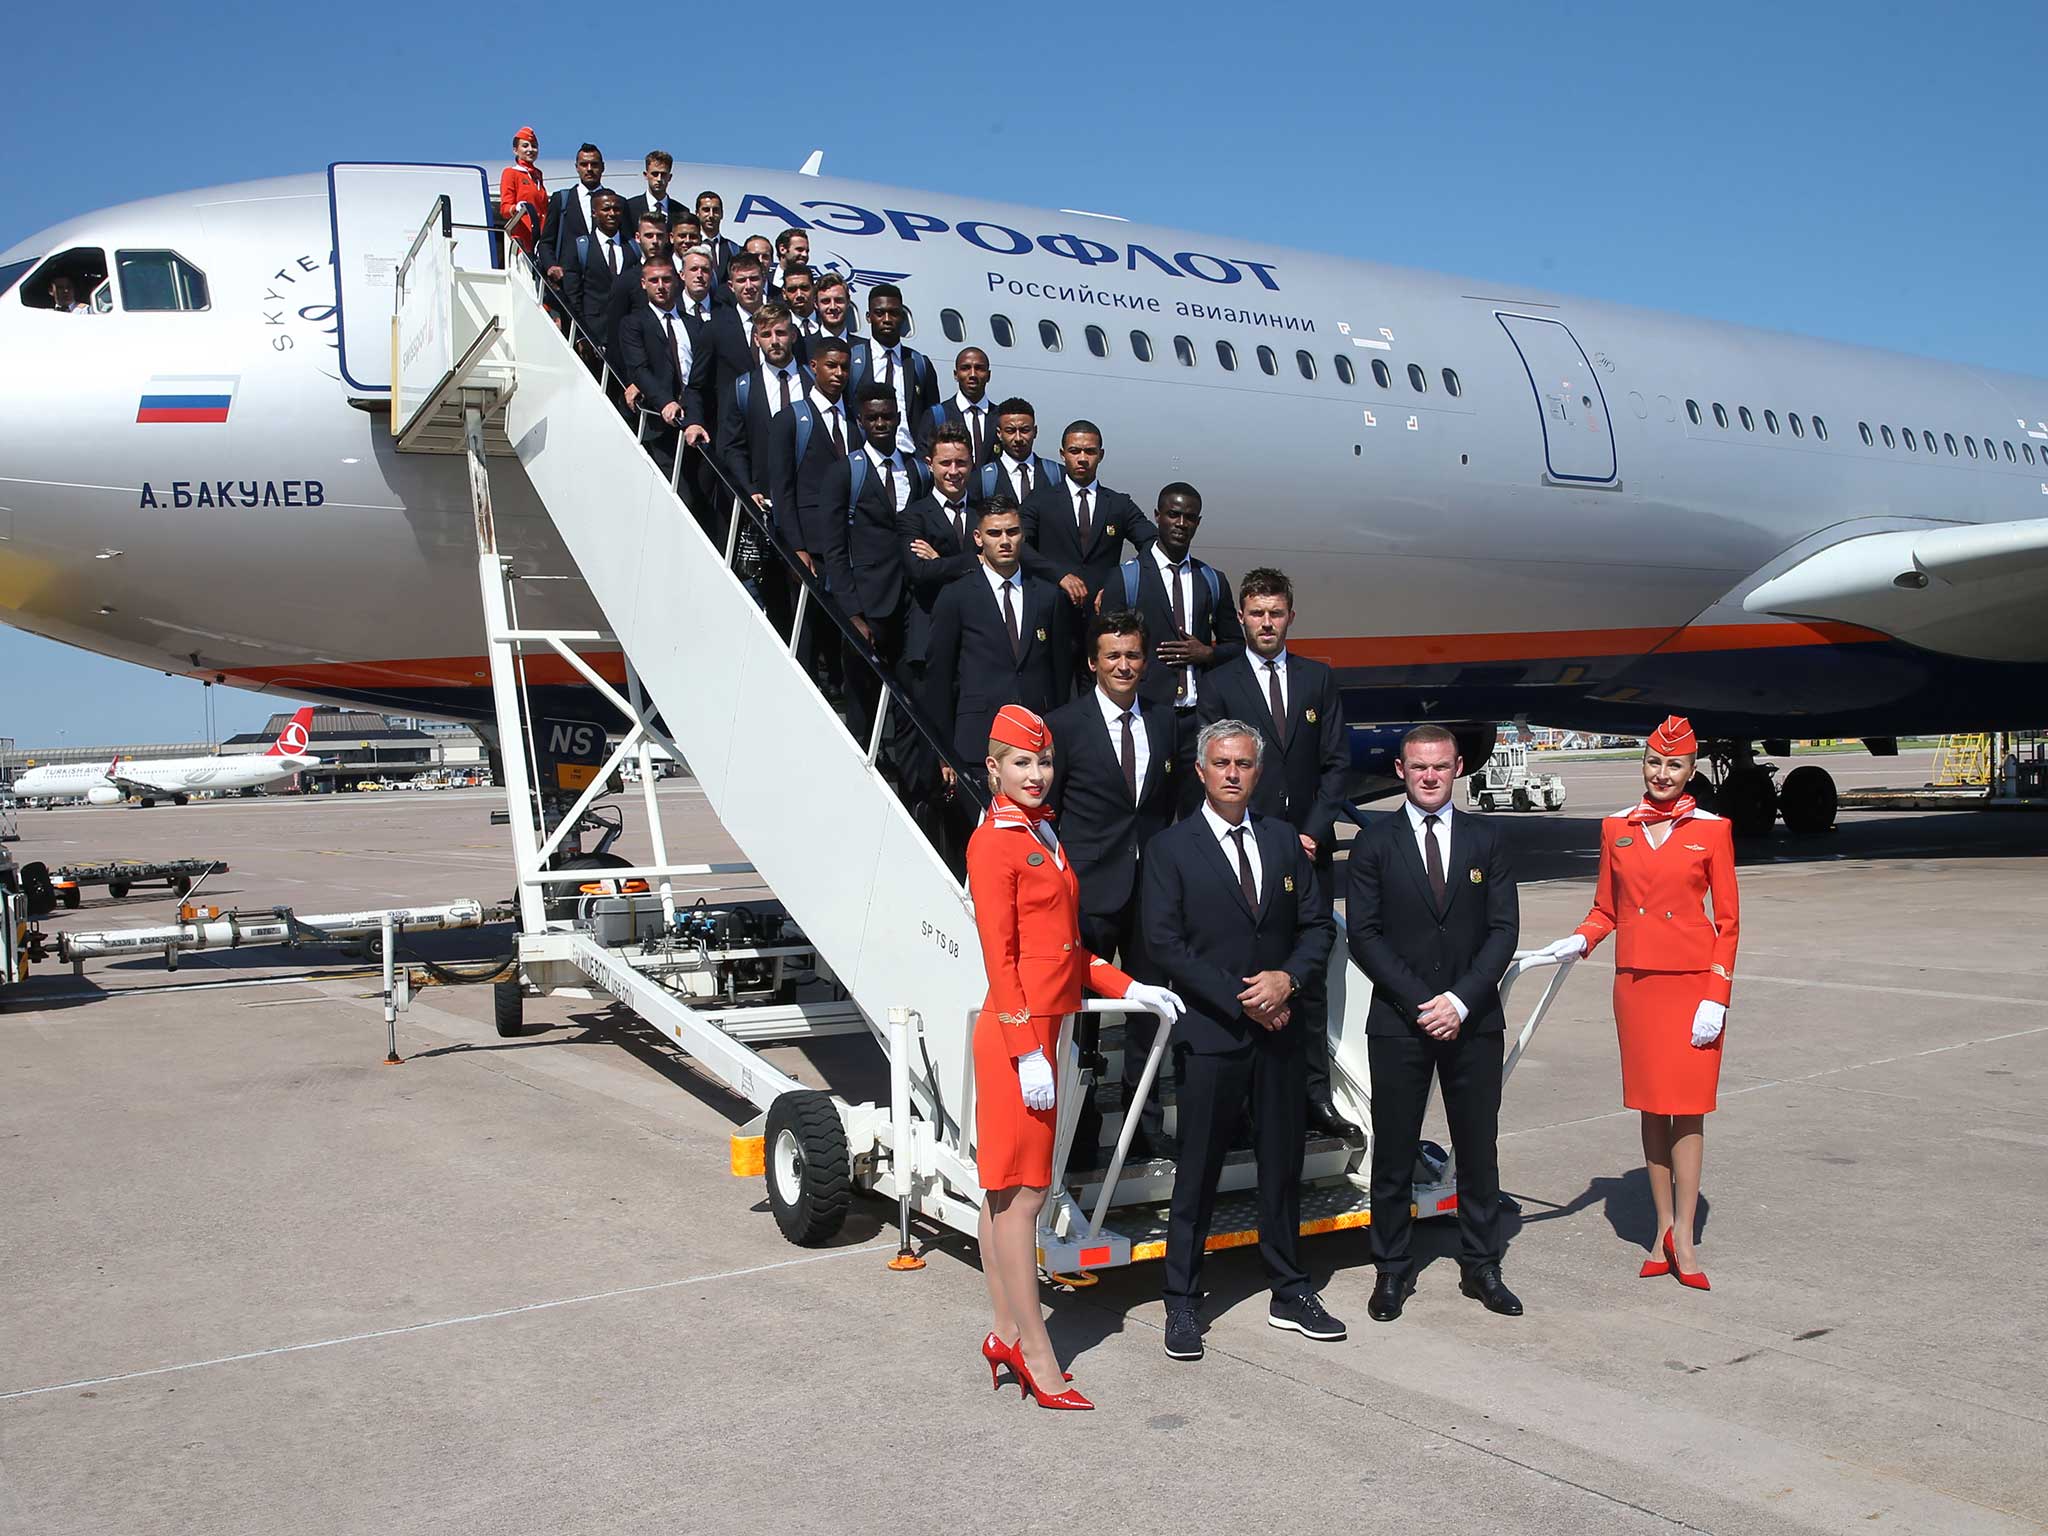 Jose Mourinho and his Manchester United pose before flying to China